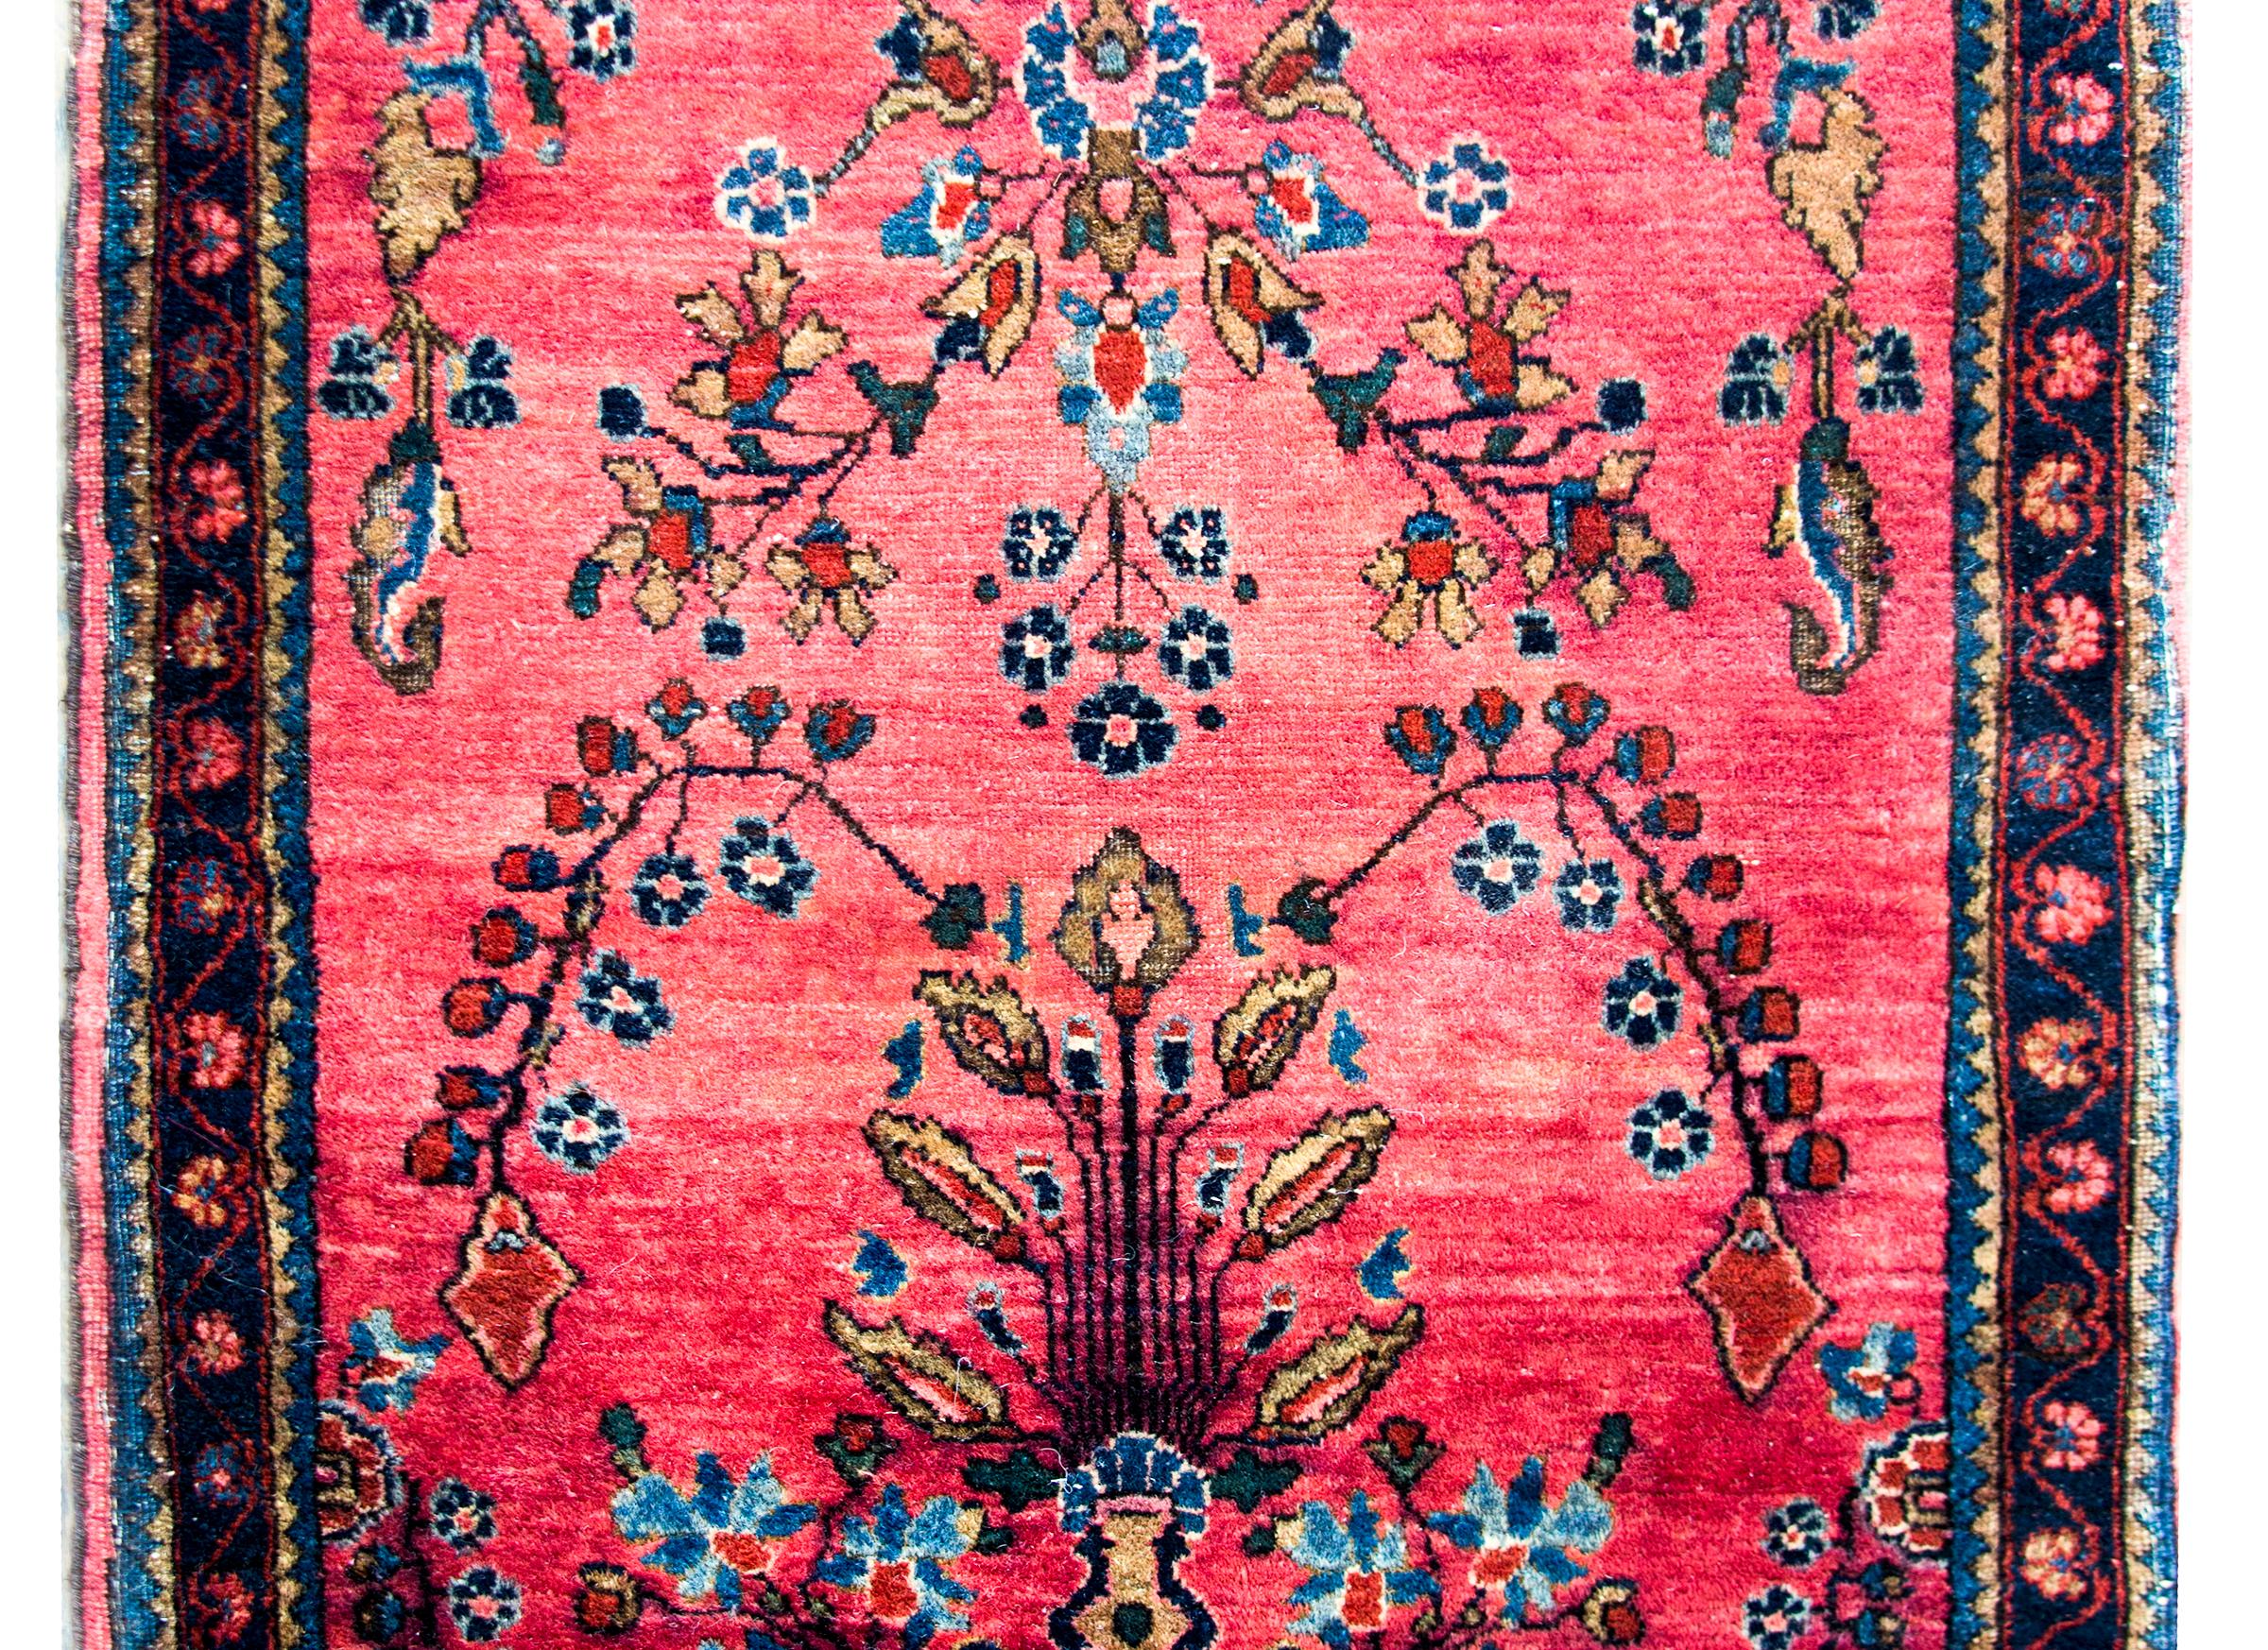 A stunning early 20th century Persian Sarouk Mohajeran rug with a mirrored floral and vine pattern woven in pink, light and dark indigo, and cream, set against a cranberry background, and surrounded by a simple border composed of multiple petite